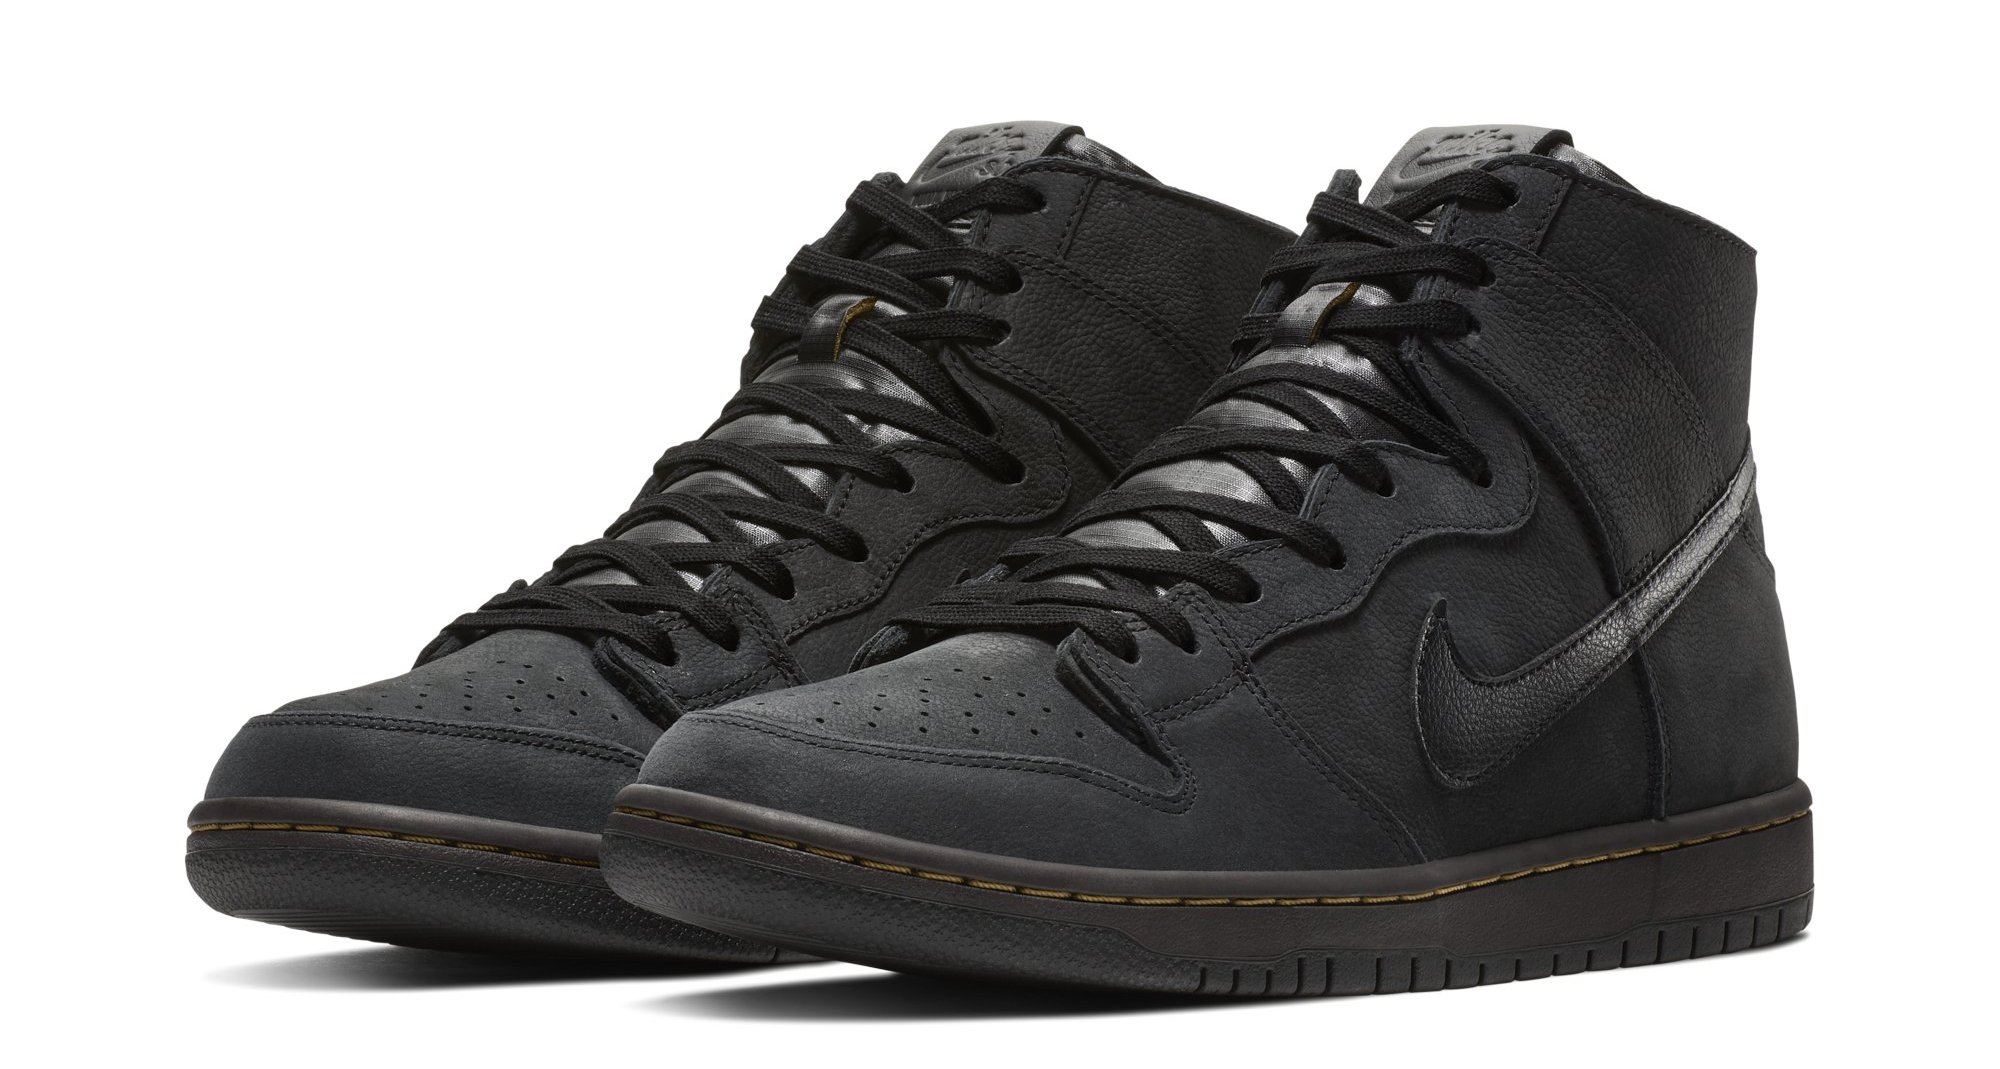 Nike SB Zoom Dunk Deconstructed PRM Release Date | Sole